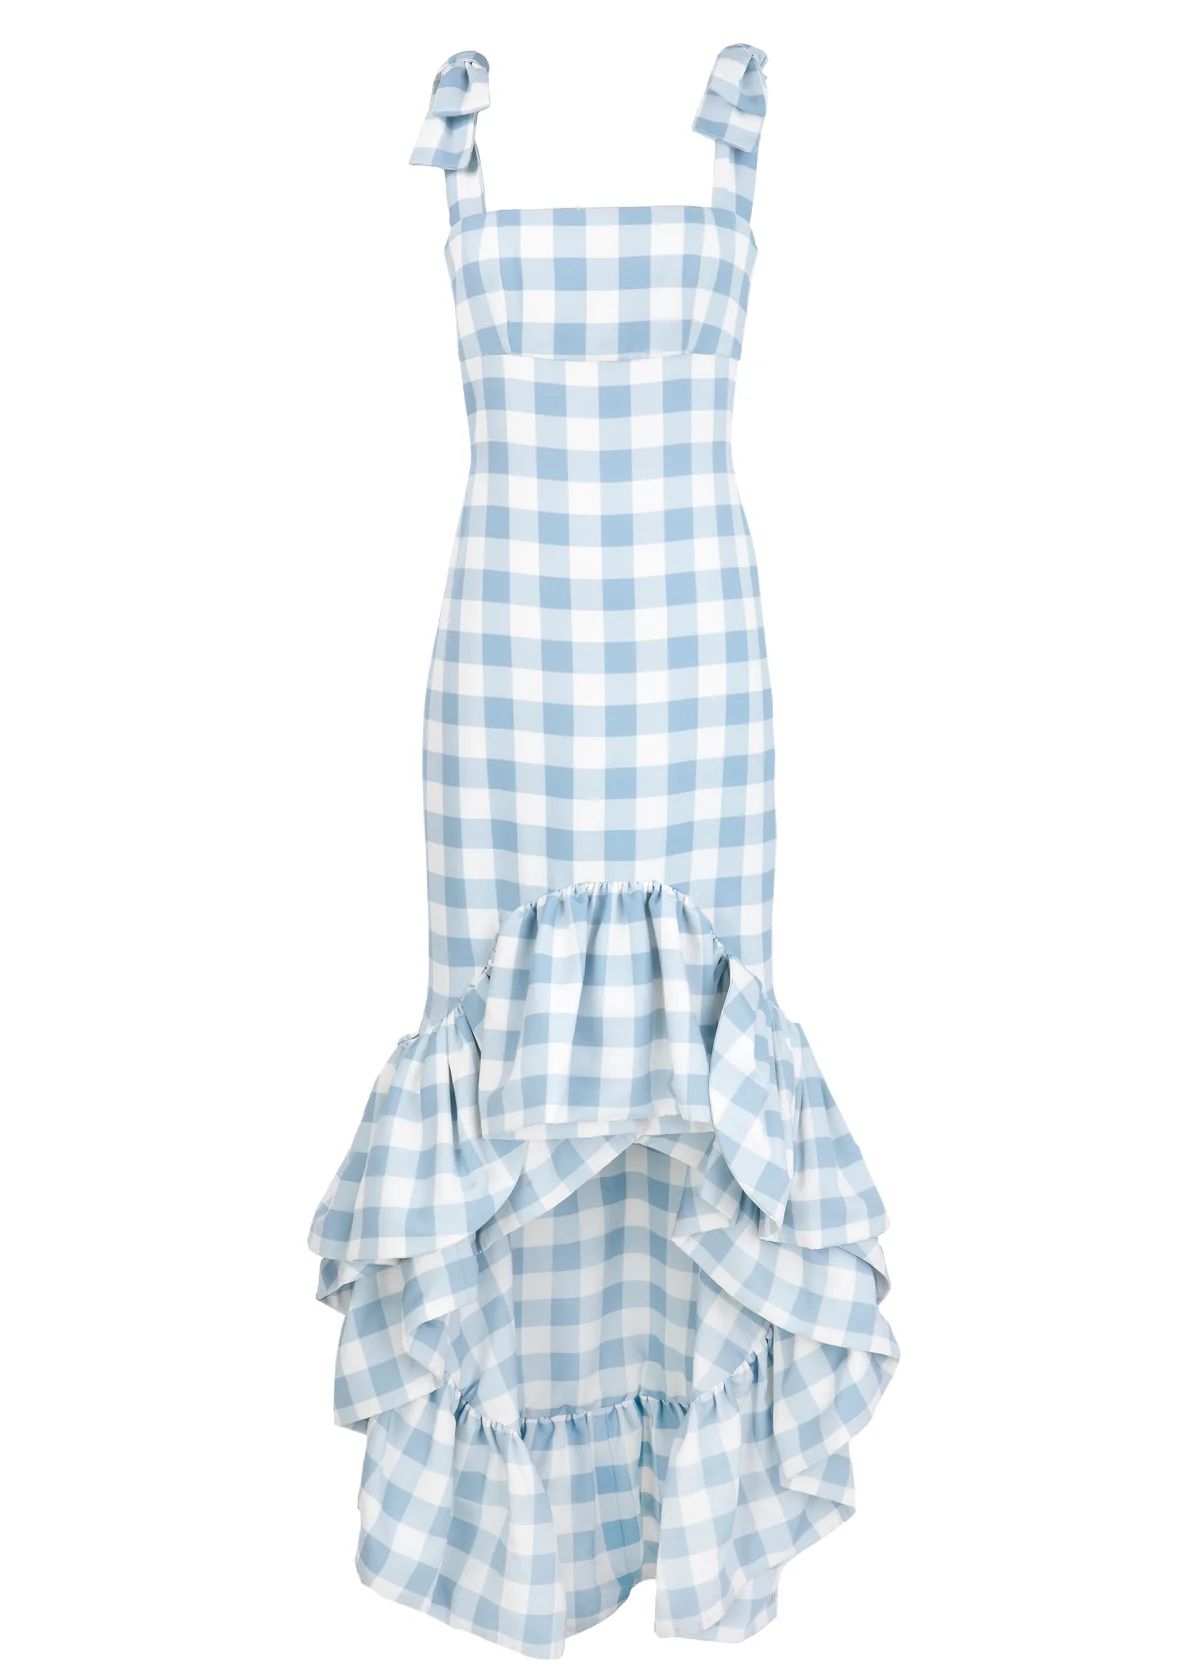 La Palma Dress in Blue Gingham | Over The Moon